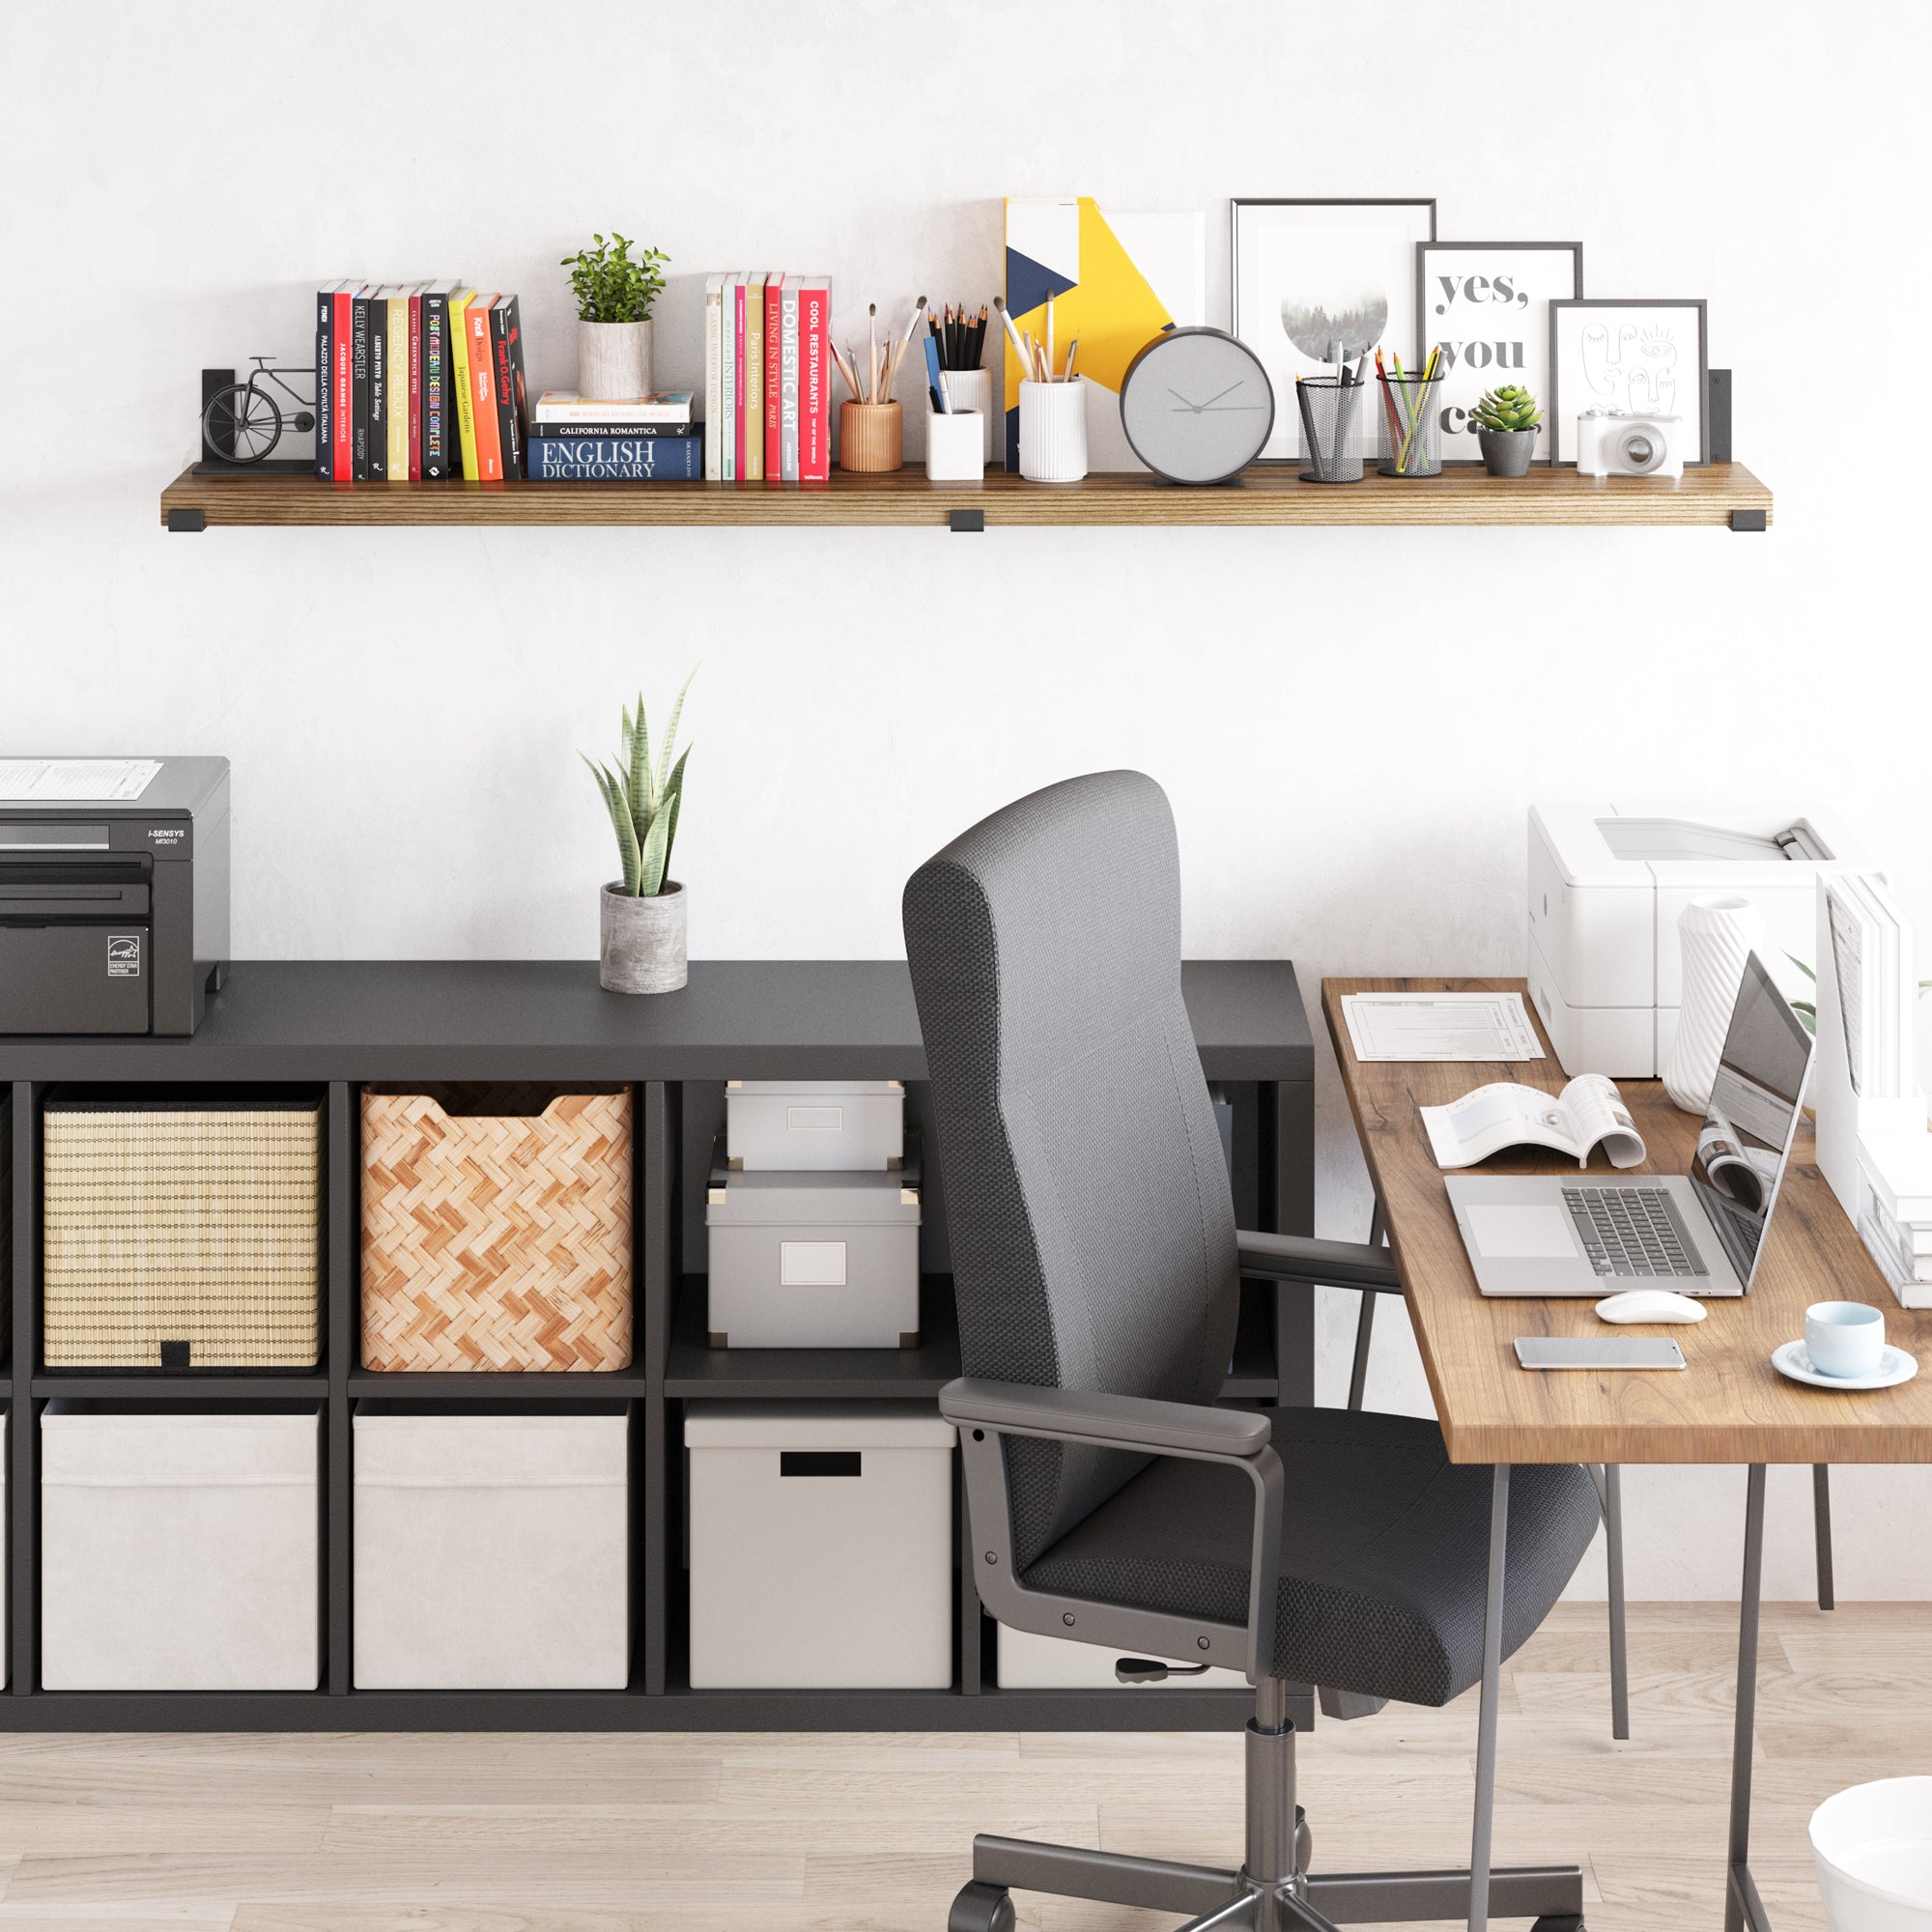 An office with organizer shelf with books, supplies, and decor.